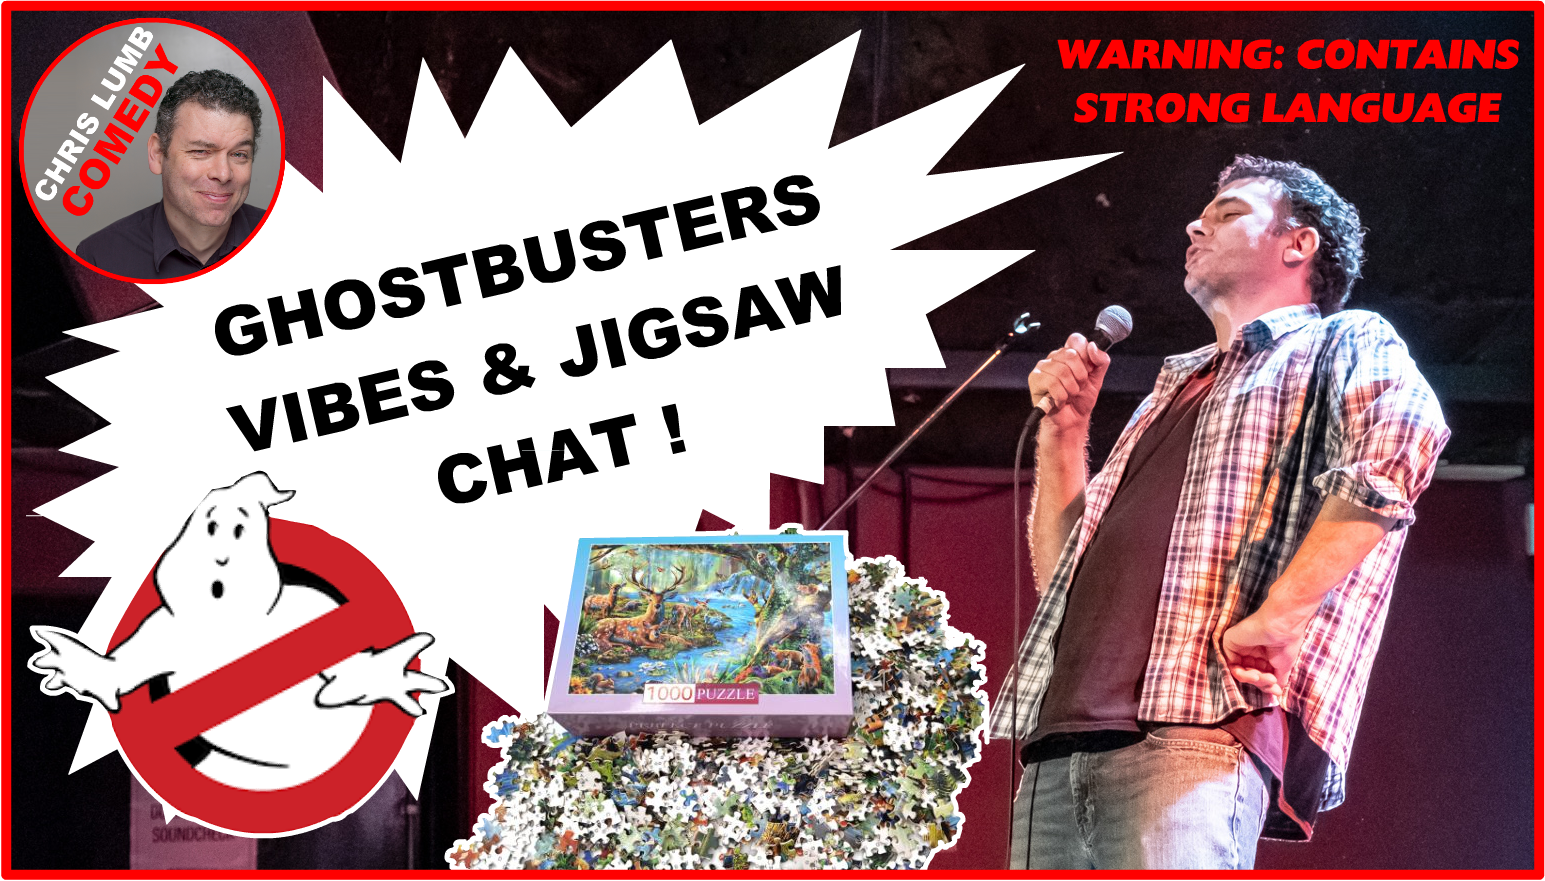 Chris Lumb Comedy "Ghostbusters Vibes and Jigsaw Chat"